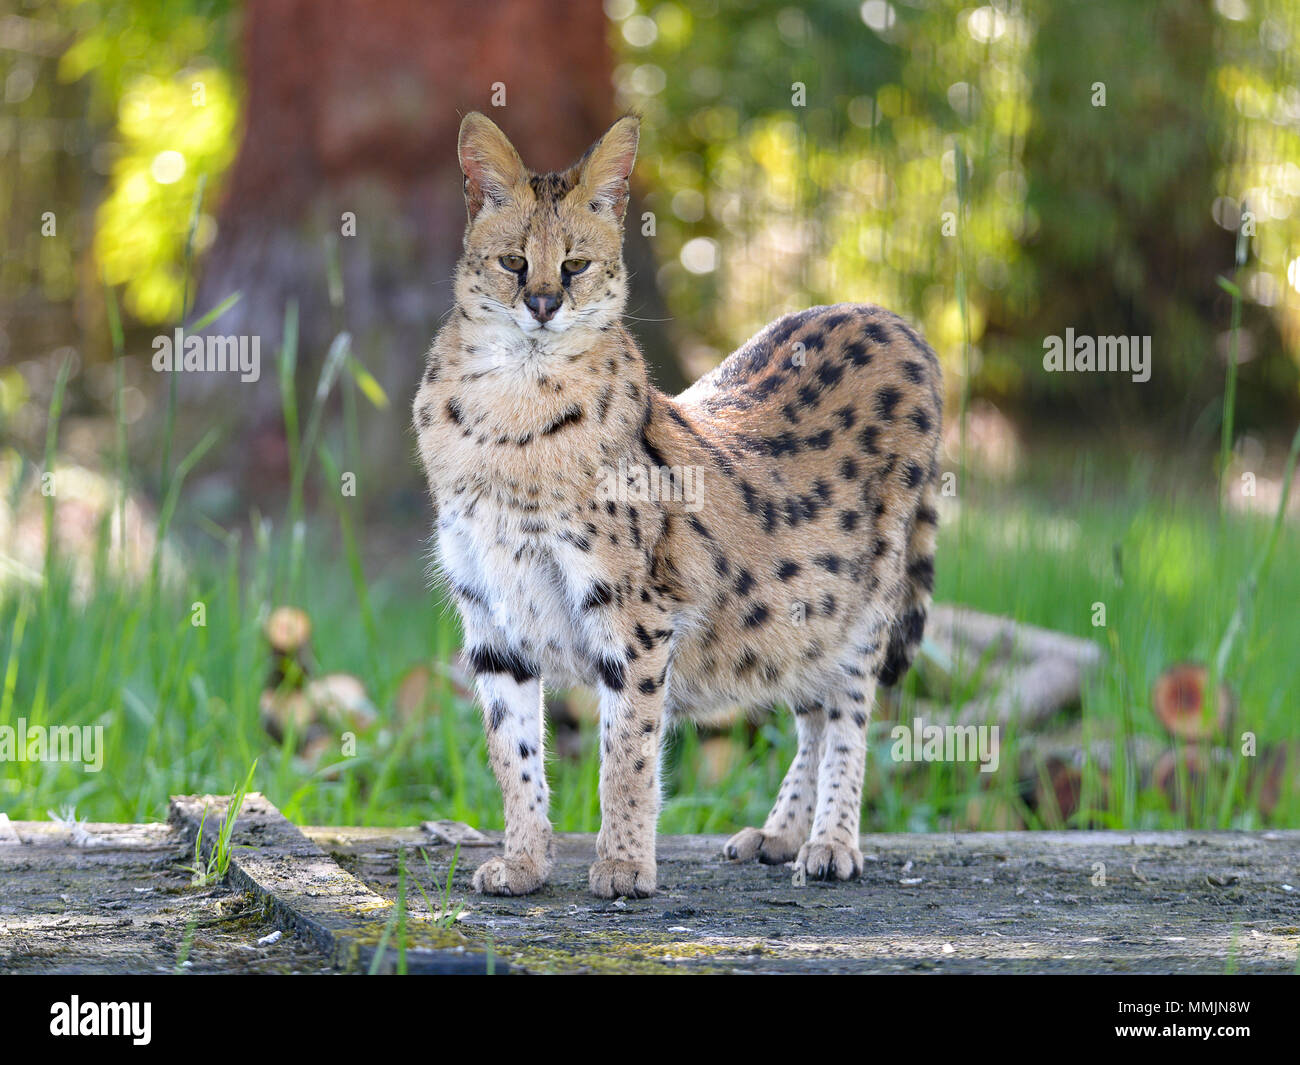 Serval (Leptailurus serval) standing seen from face Stock Photo